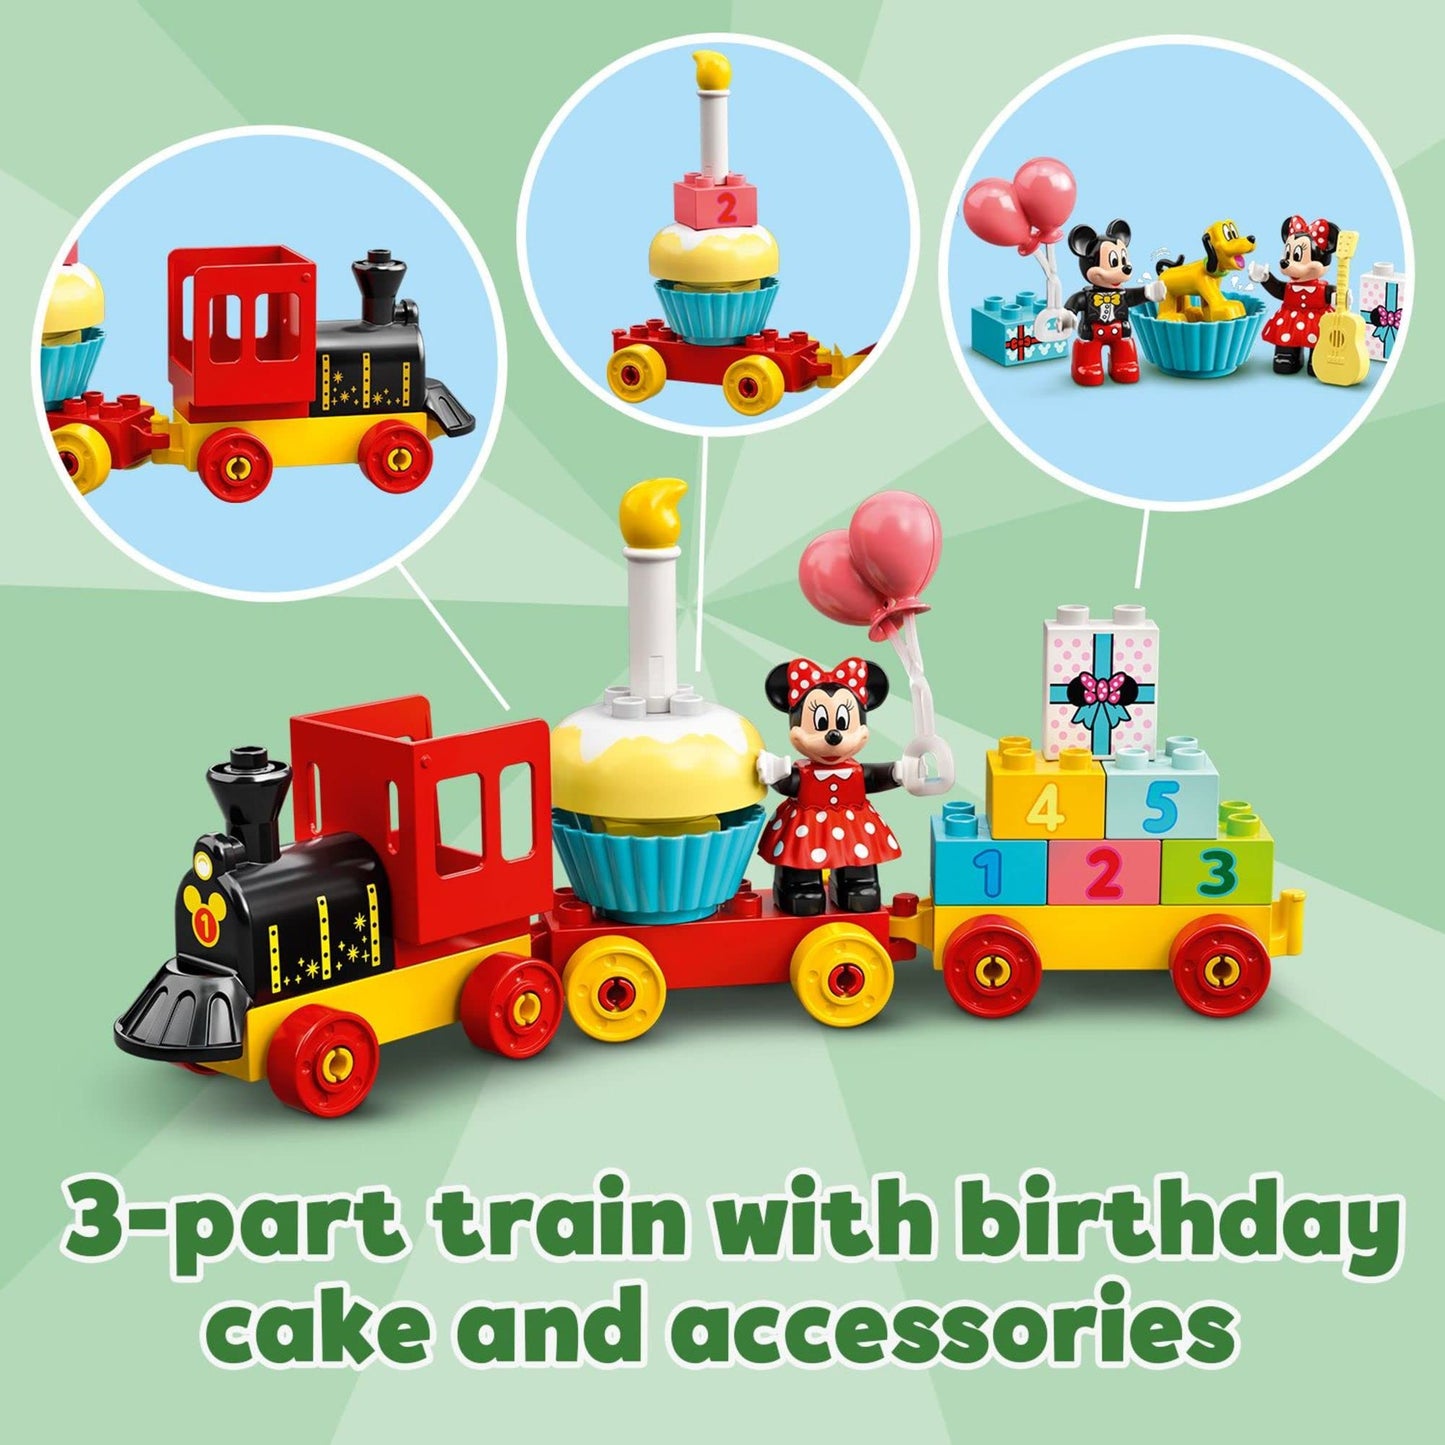 LEGO DUPLO Disney Mickey & Minnie Mouse Birthday Train - Building Toys for Toddlers with Number Bricks, Cake and Balloons, Early Learning and Motor Skill Toy, Great Gift for Girls, Boys Ages 2+, 10941